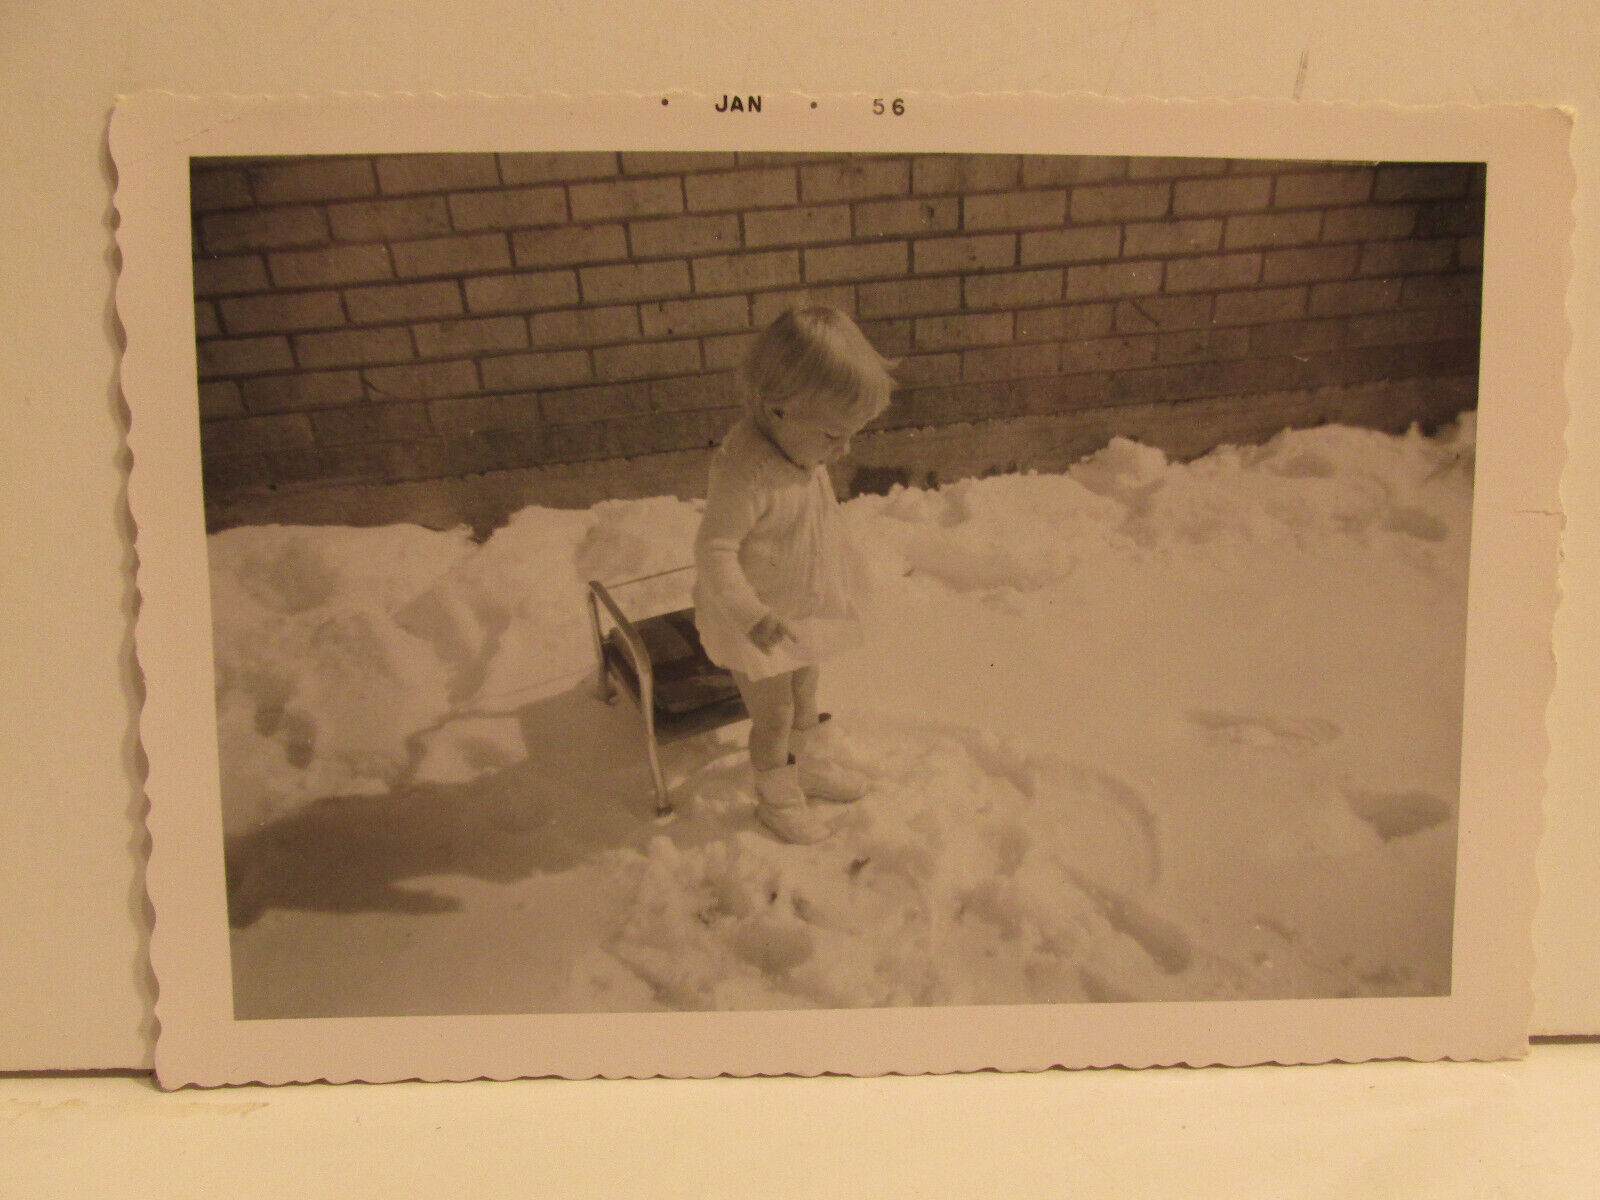 VINTAGE FOUND PHOTOGRAPH B&W ART OLD PHOTO 1950S BLONDE TODDLER GIRL IN SNOW PIC